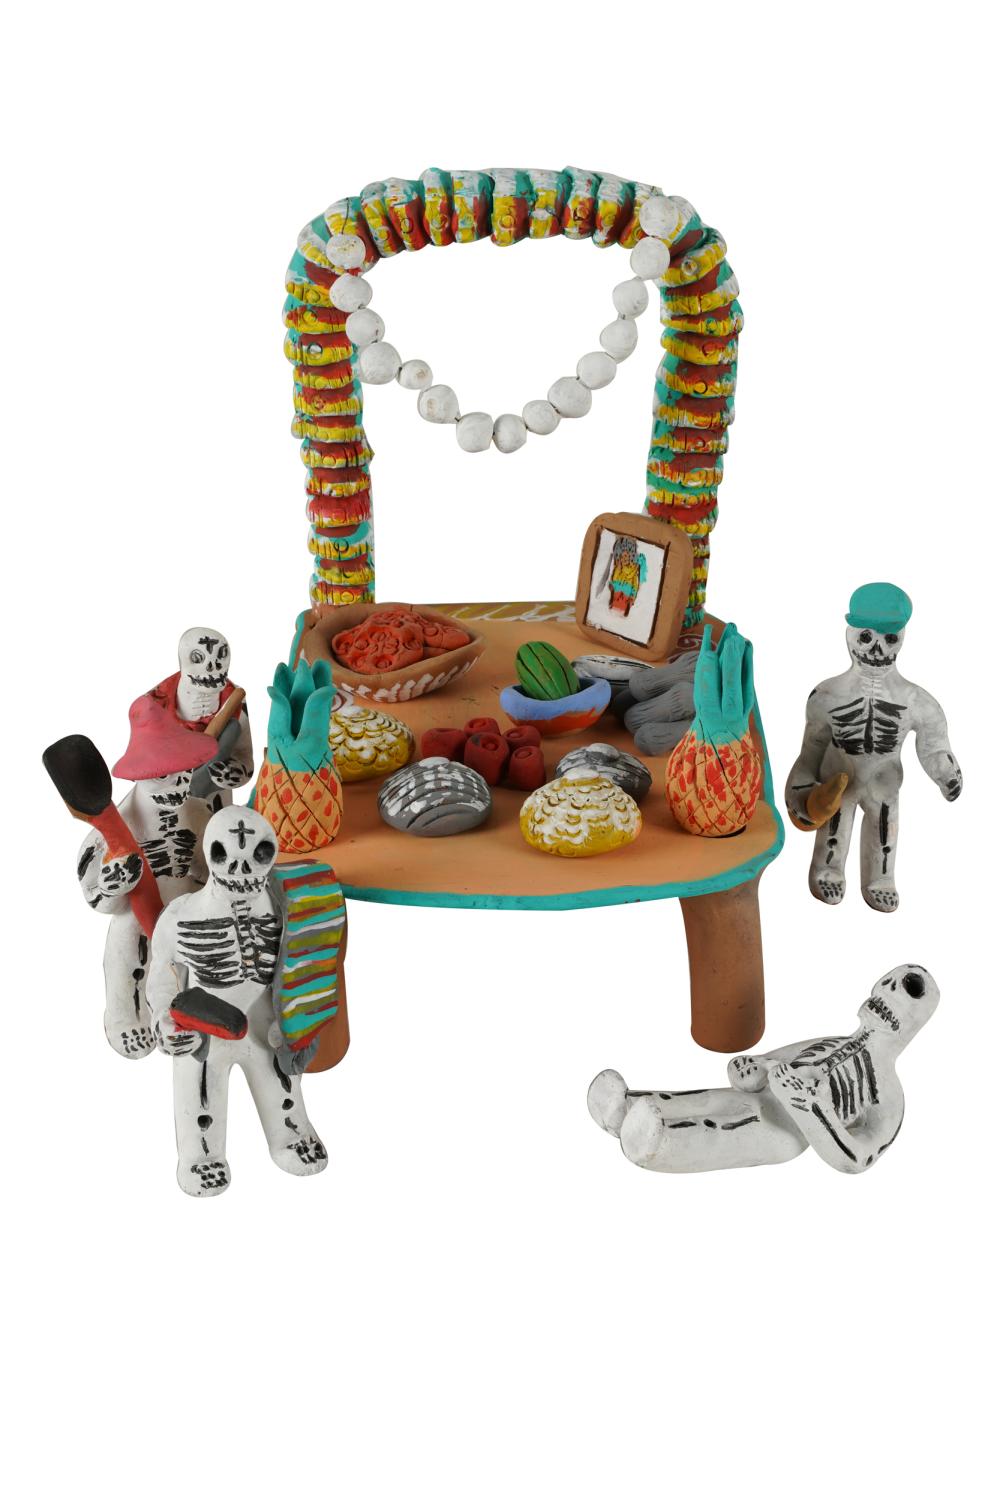 MEXICAN DAY OF THE DEAD FOLK ART 333ca9